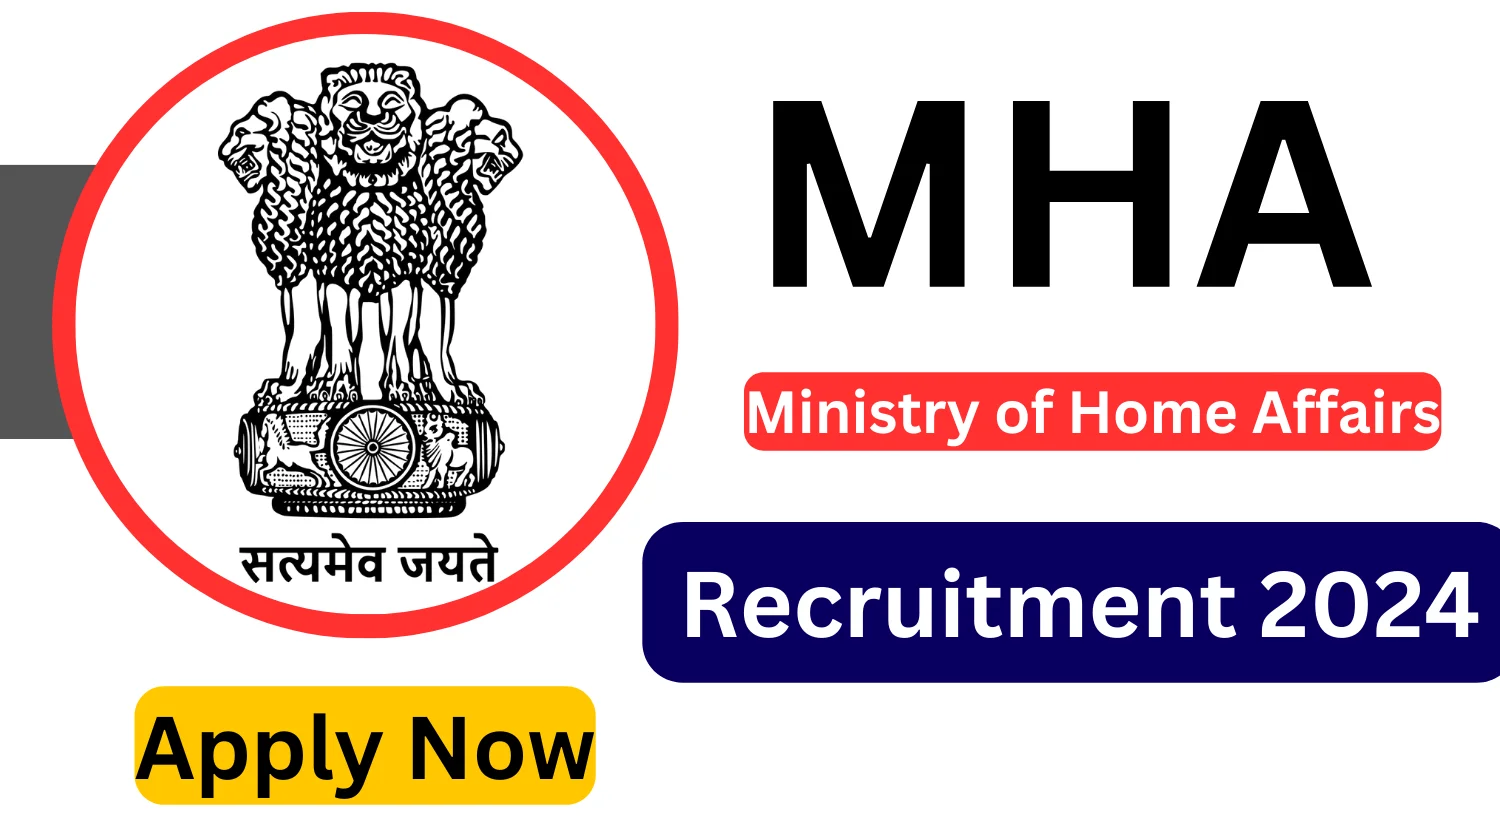 Ministry of Home Affairs Recruitment 2024